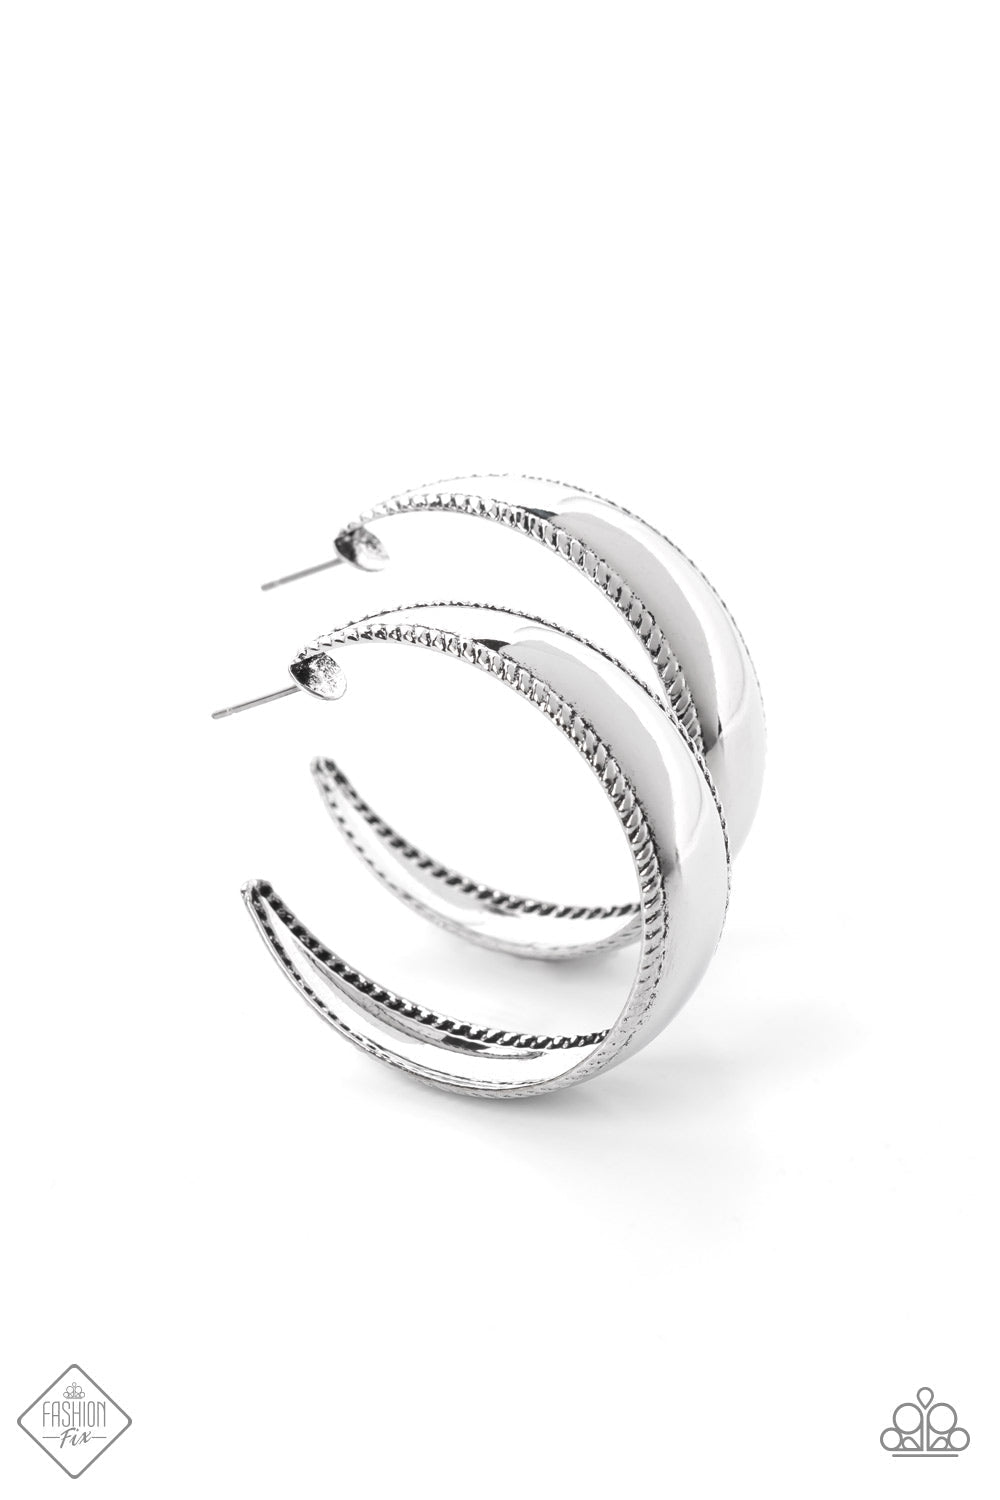 Dune Dynasty - Silver Hoop Fashion Earrings - Paparazzi Accessories - A wide smooth silver bar bordered in rope-like texture curls into a simple hoop earring, resulting in a high-sheen statement piece designed to dazzle. Earring attaches to a standard post fitting. Hoop measures approximately 1 1/2" in diameter. 